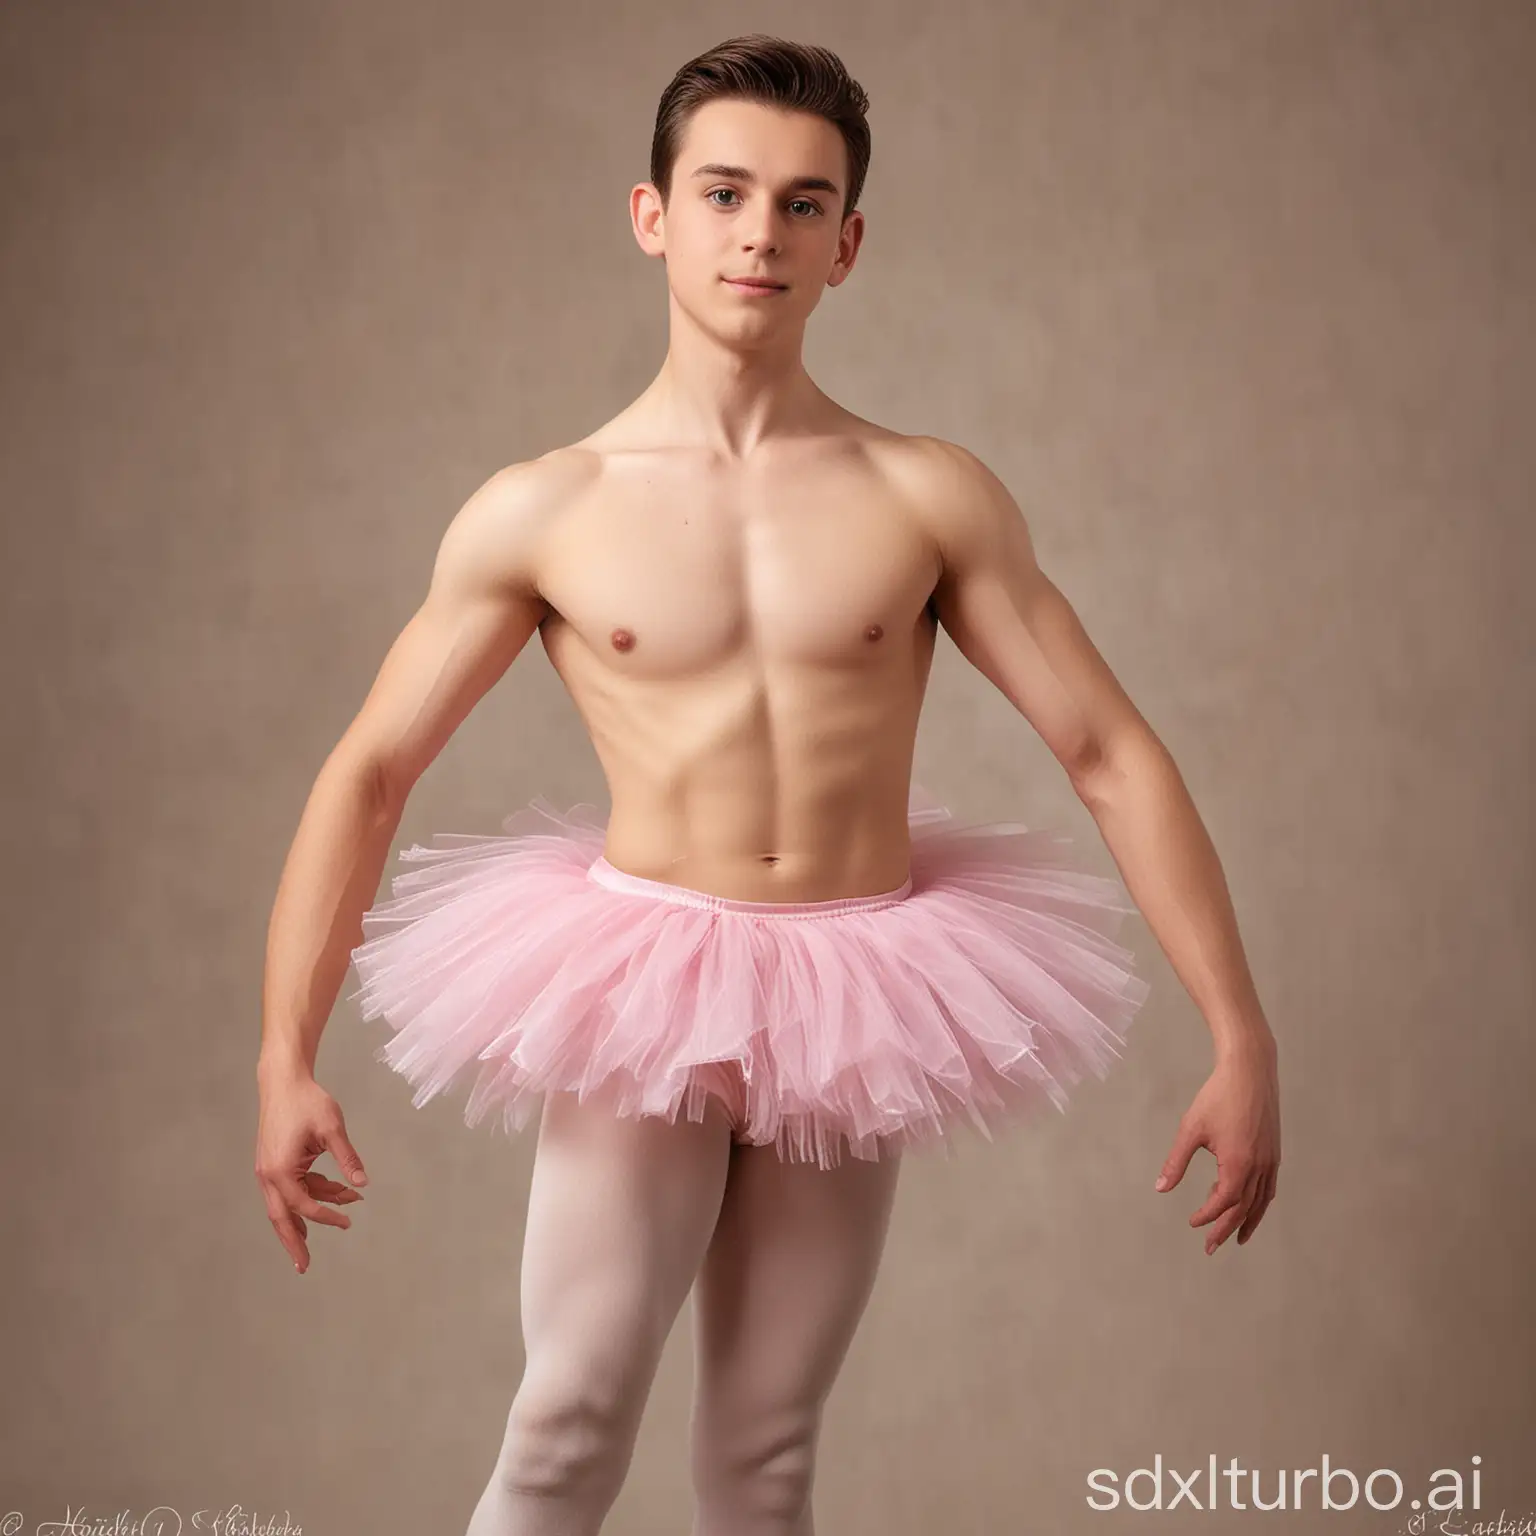 a handsome, fit, young adult male dressed in a short, stiff, tight, pink tutu and pointe shoes, standing on pointe, perfect face, clear faces, perfect eyes, perfect noses, clear faces, smooth skin, photograph style, the photo is captioned “father please!”